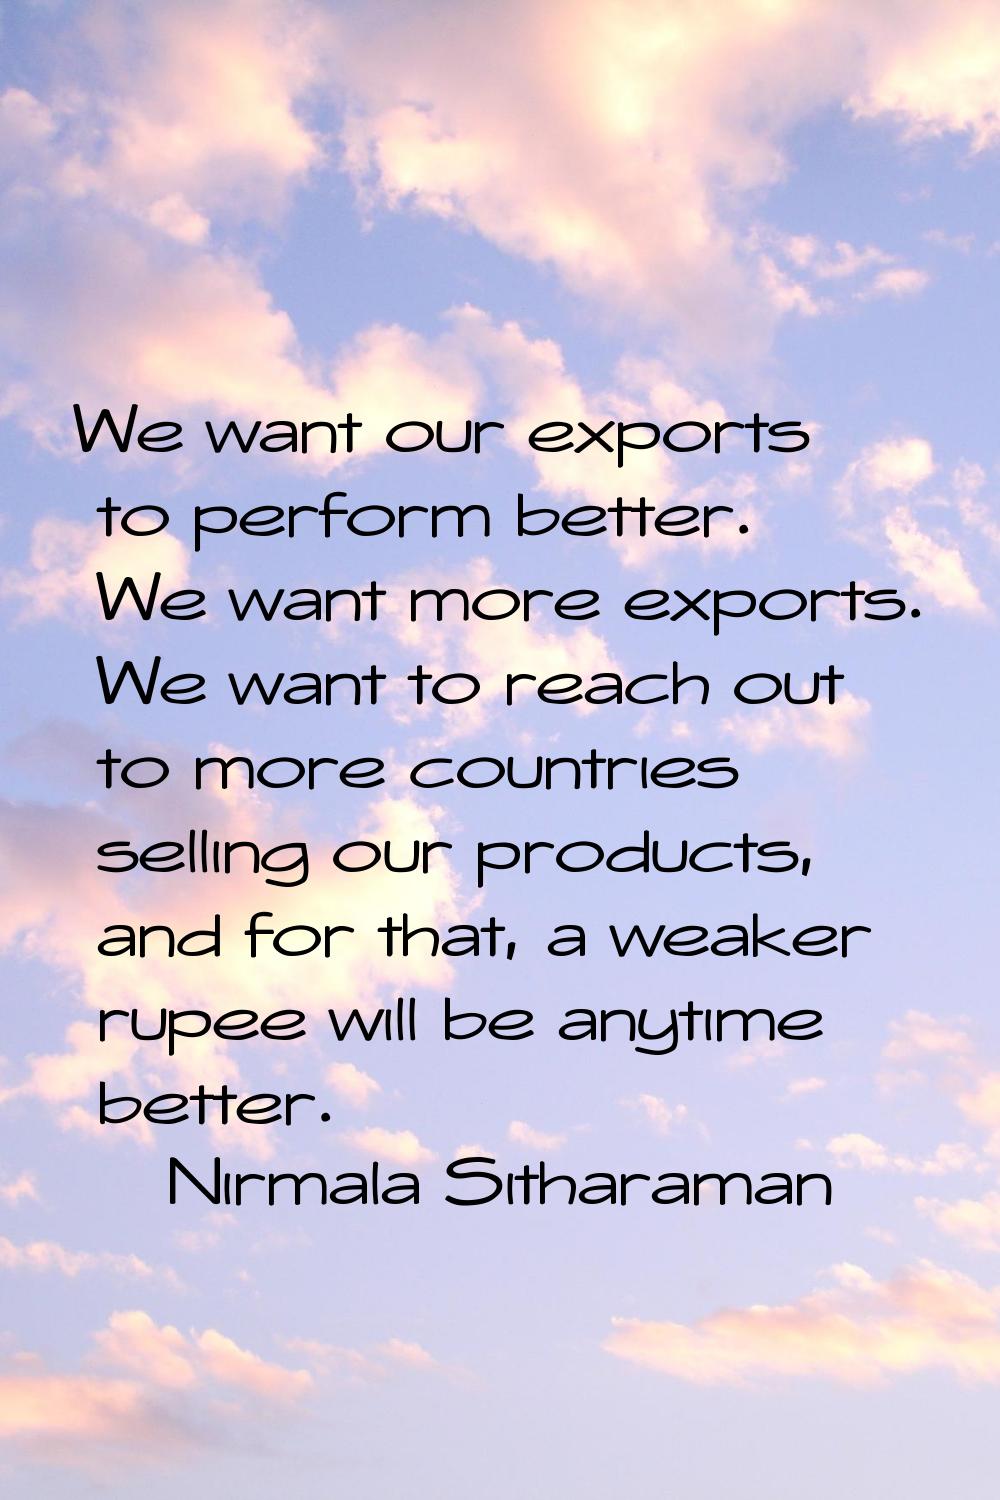 We want our exports to perform better. We want more exports. We want to reach out to more countries